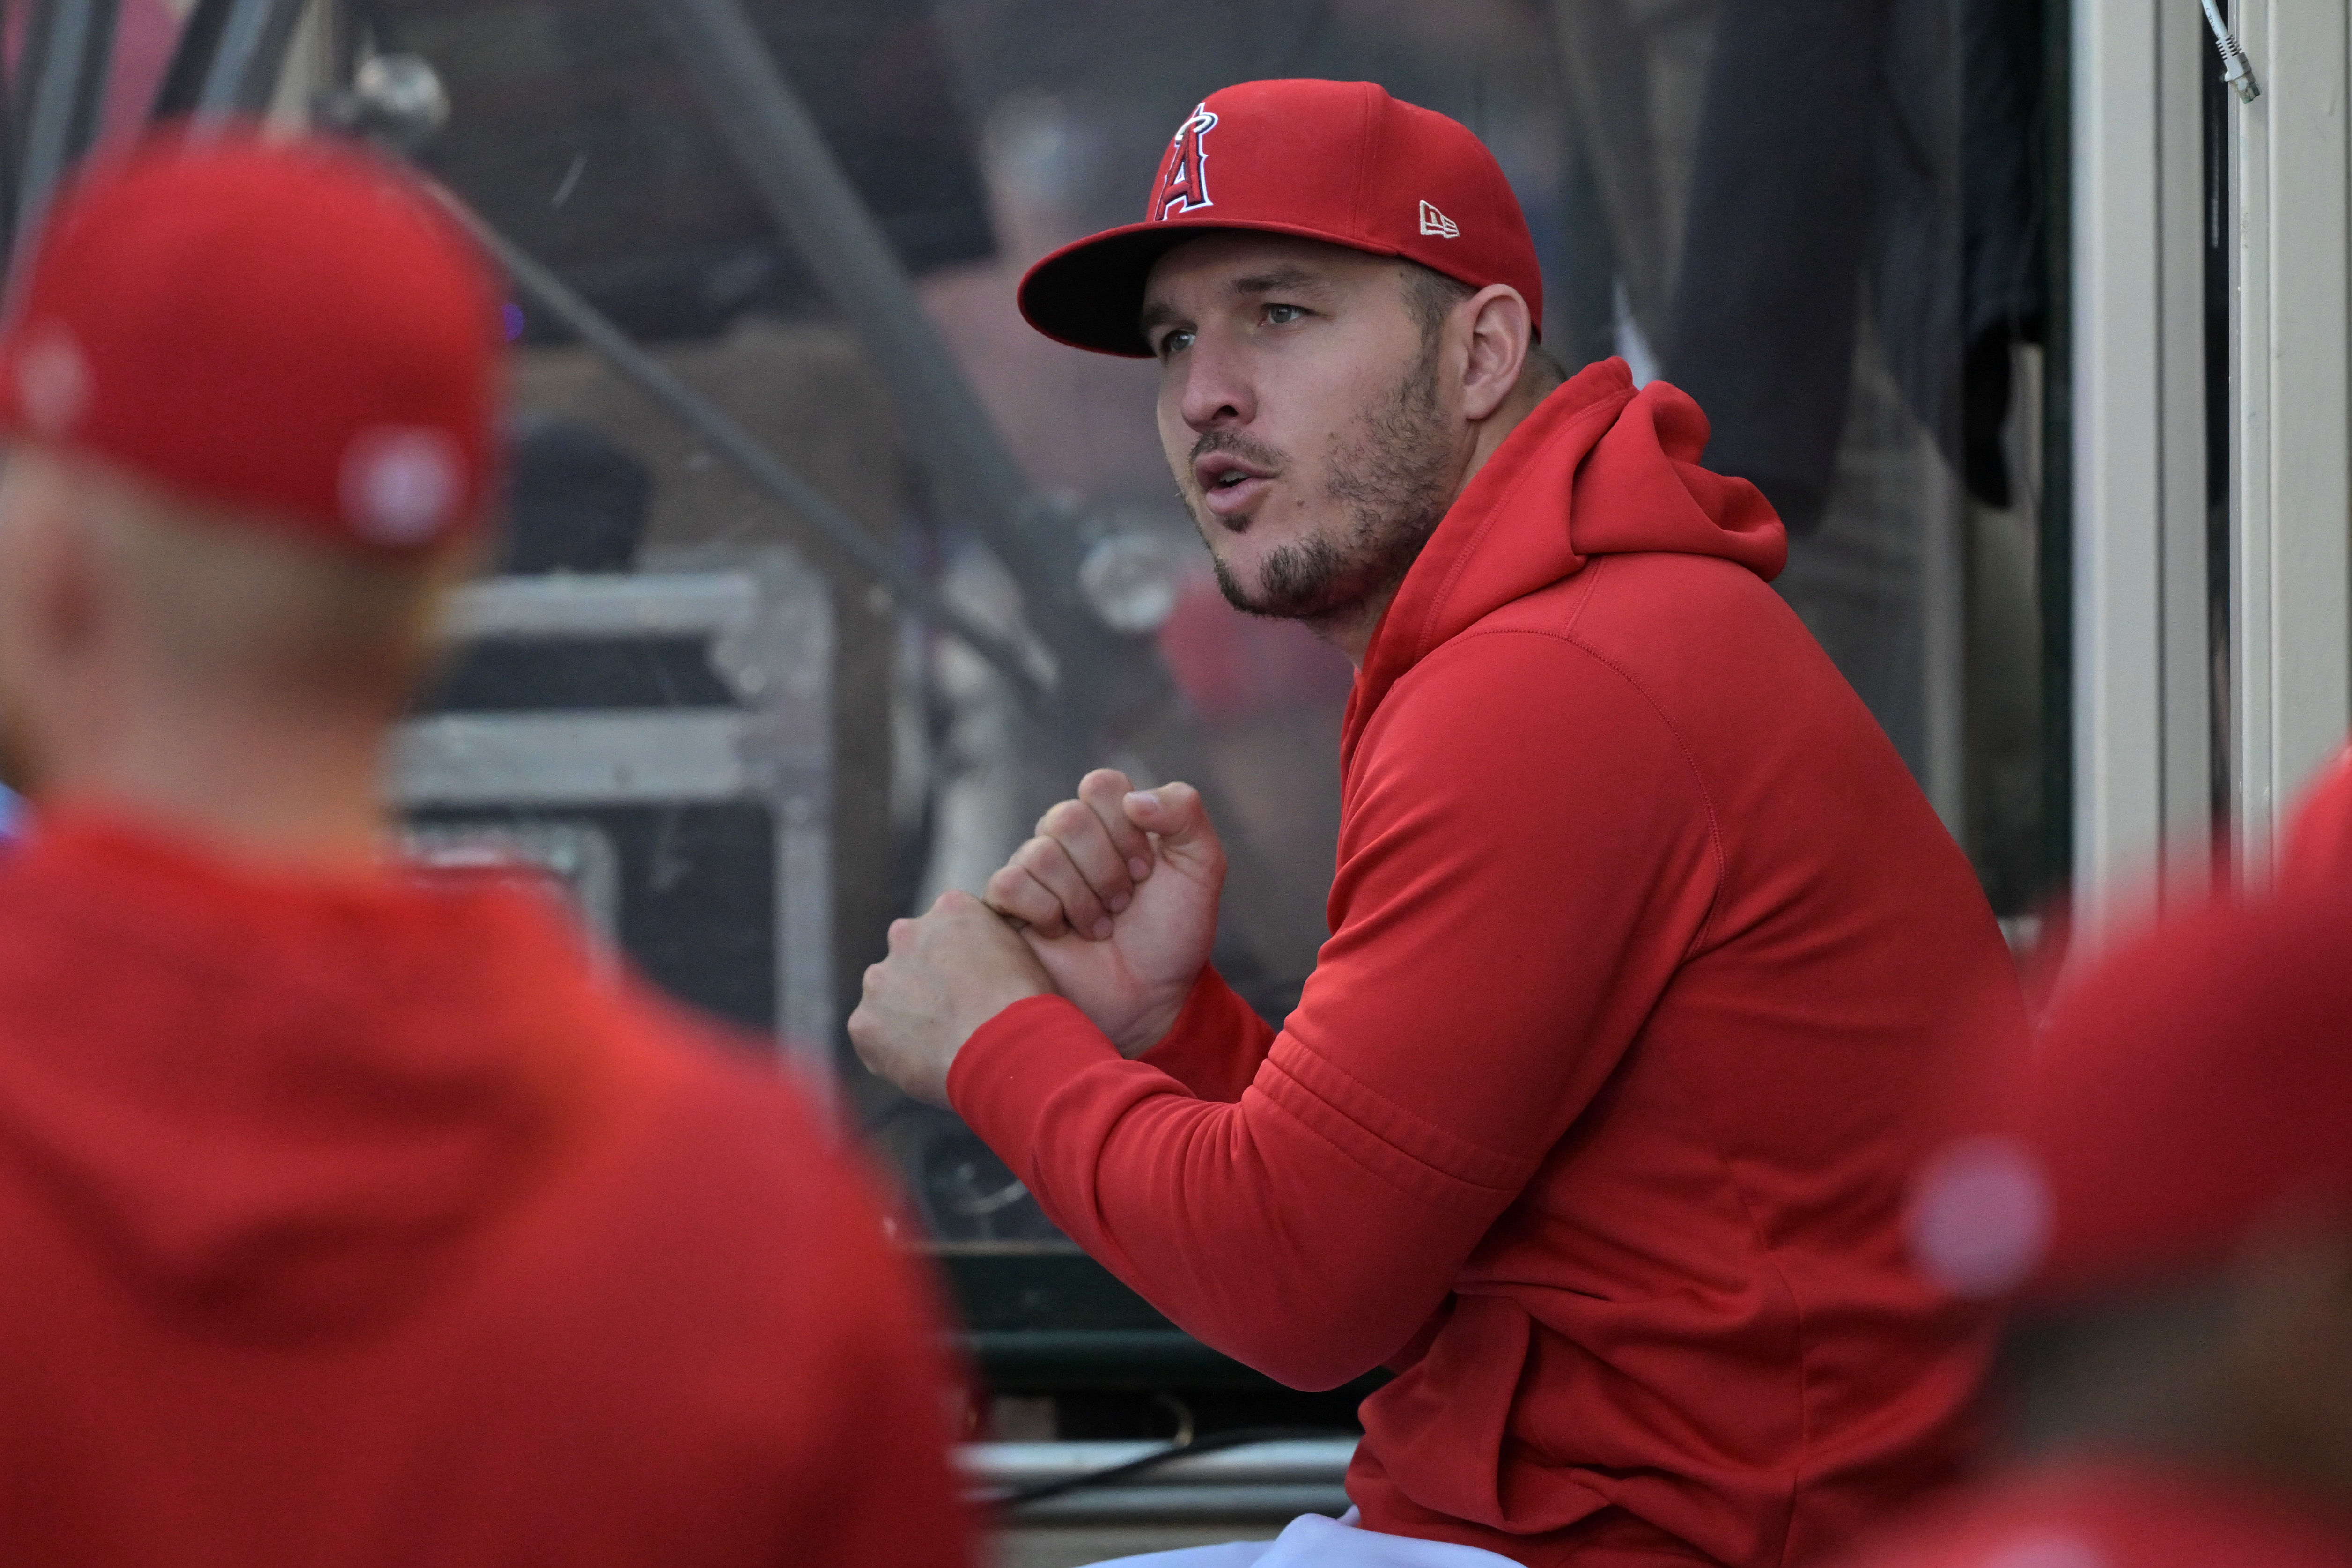 Mike Trout spoke on his own father in April